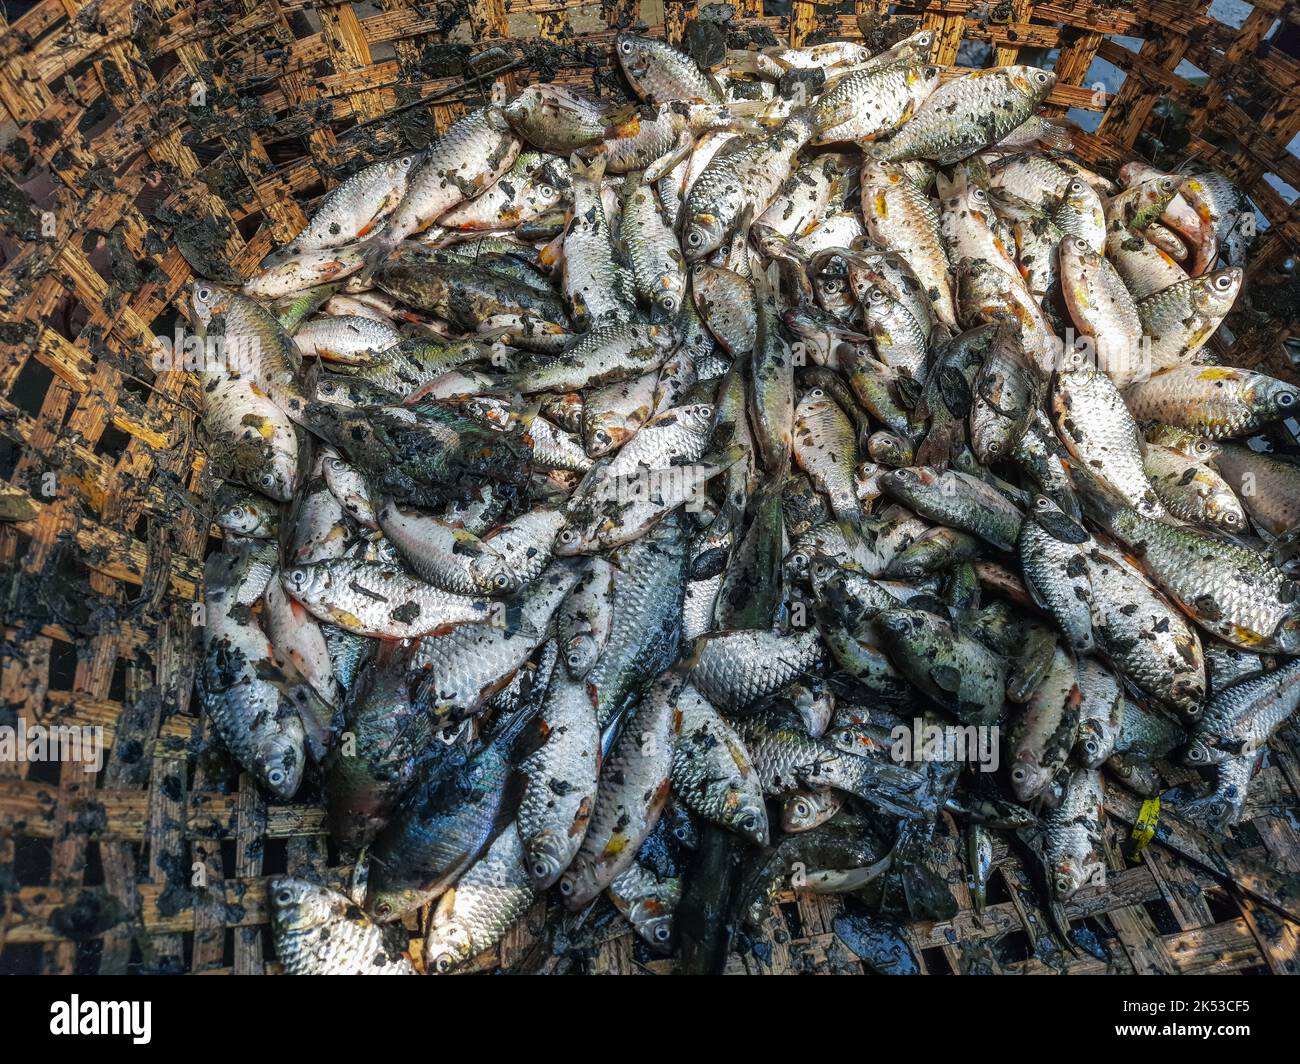 Pile of small puntius barb fish for sale in Indian fish market barb fish culture and harvesting. Puntius for sale in the local market shops for customers. Stock Photo